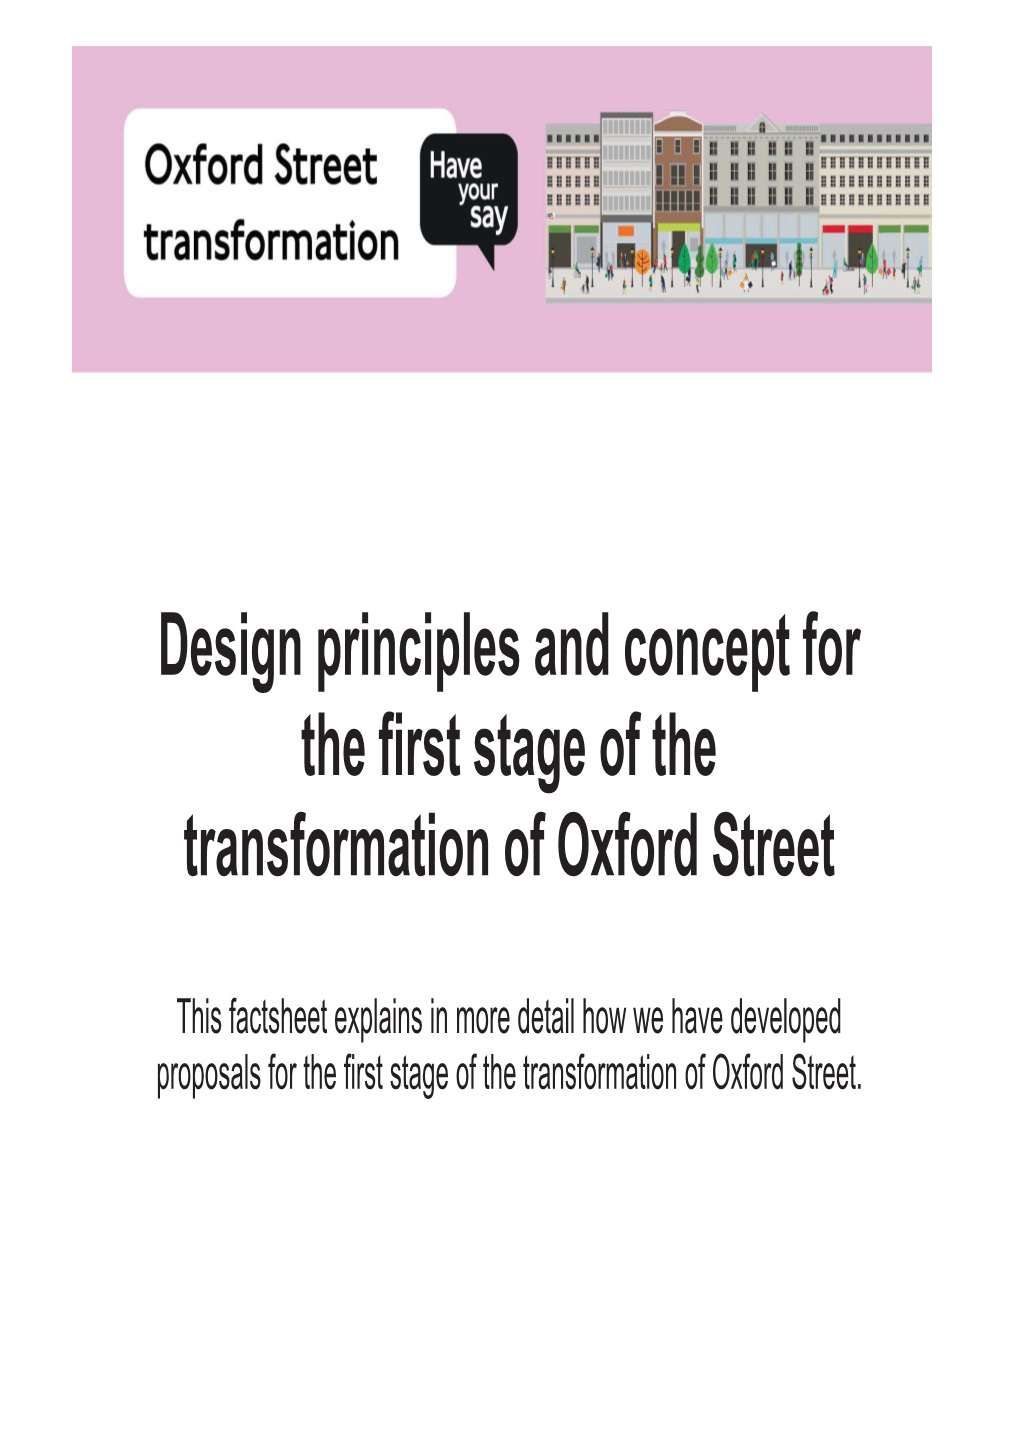 Design Principles and Concept for the First Stage of the Transformation of Oxford Street